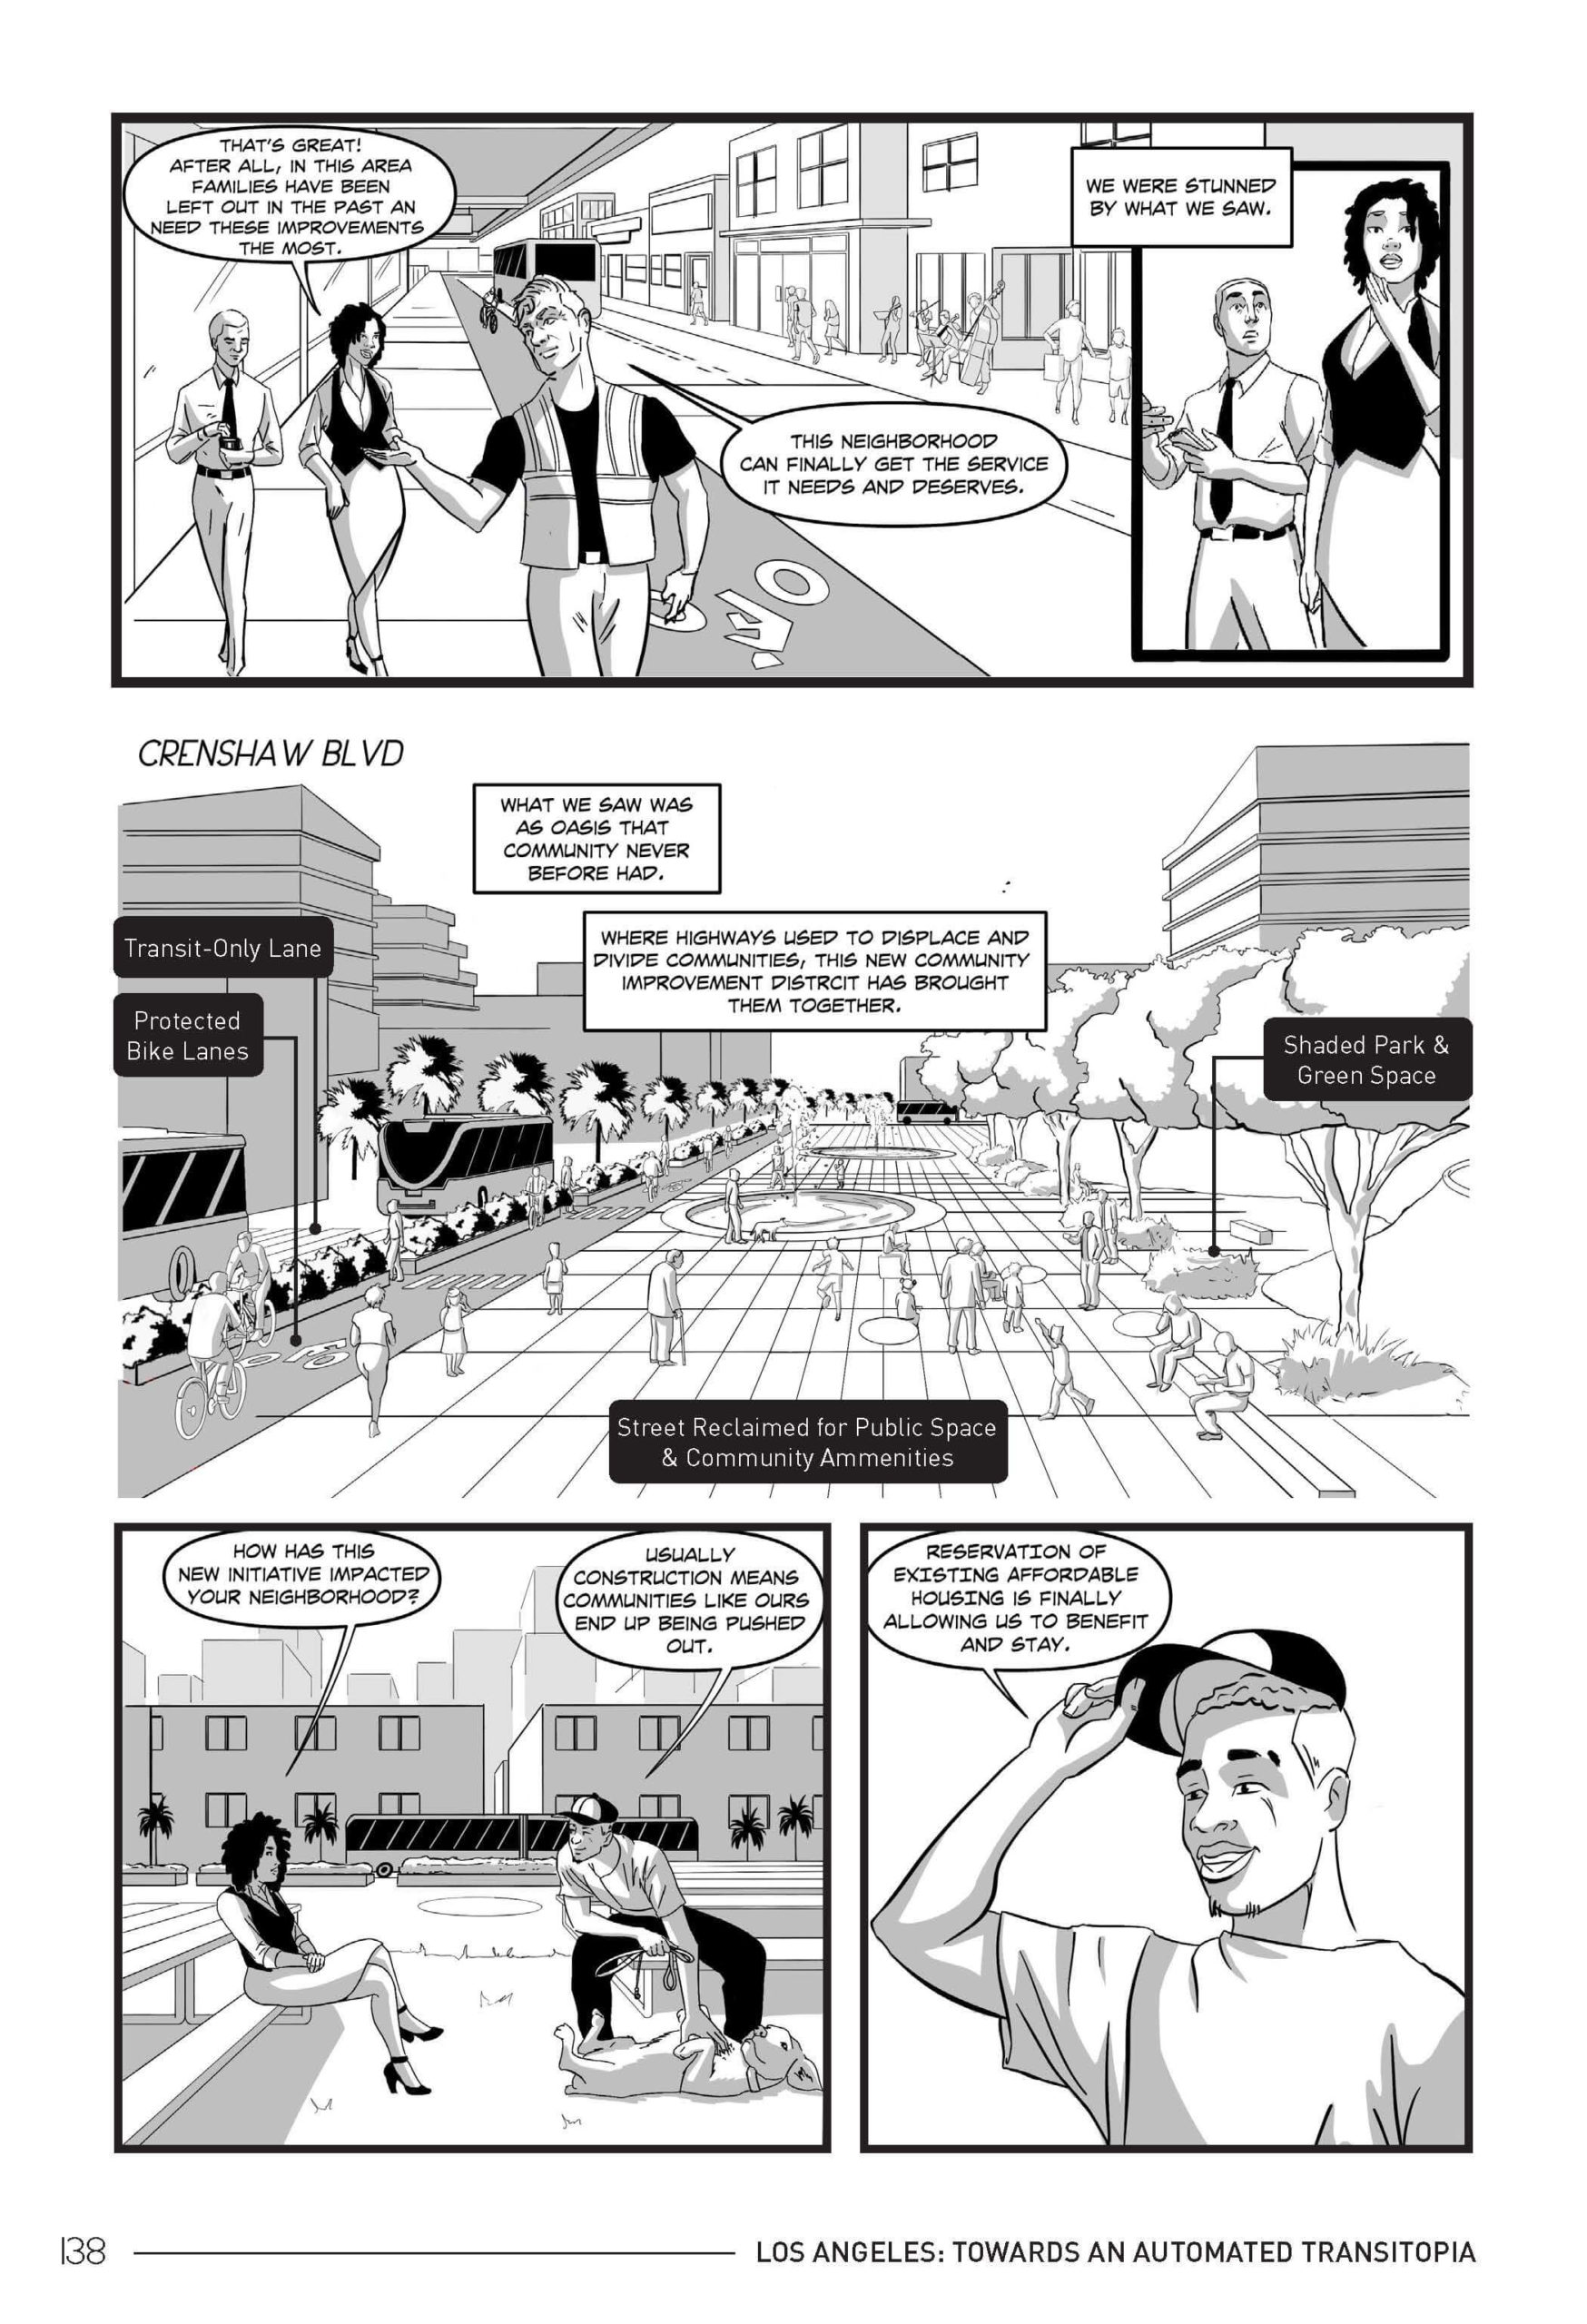 page from graphic novel "Transitopia"